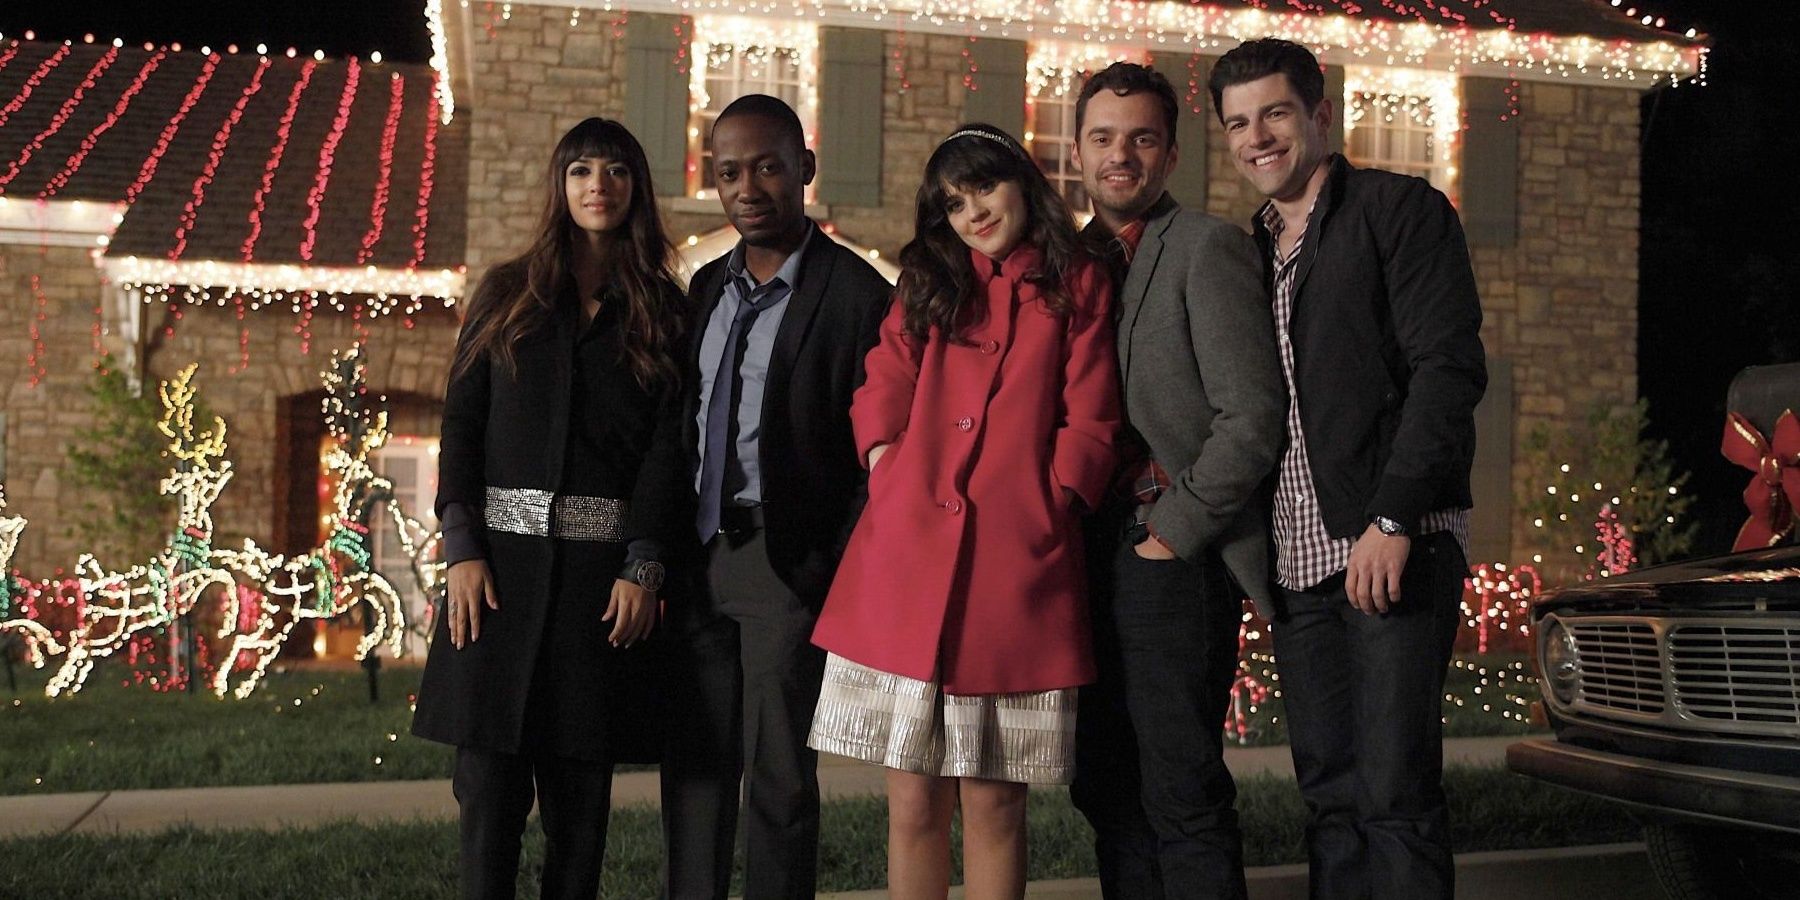 The group goes to candy cane lane to cheer Jess up in New Girl